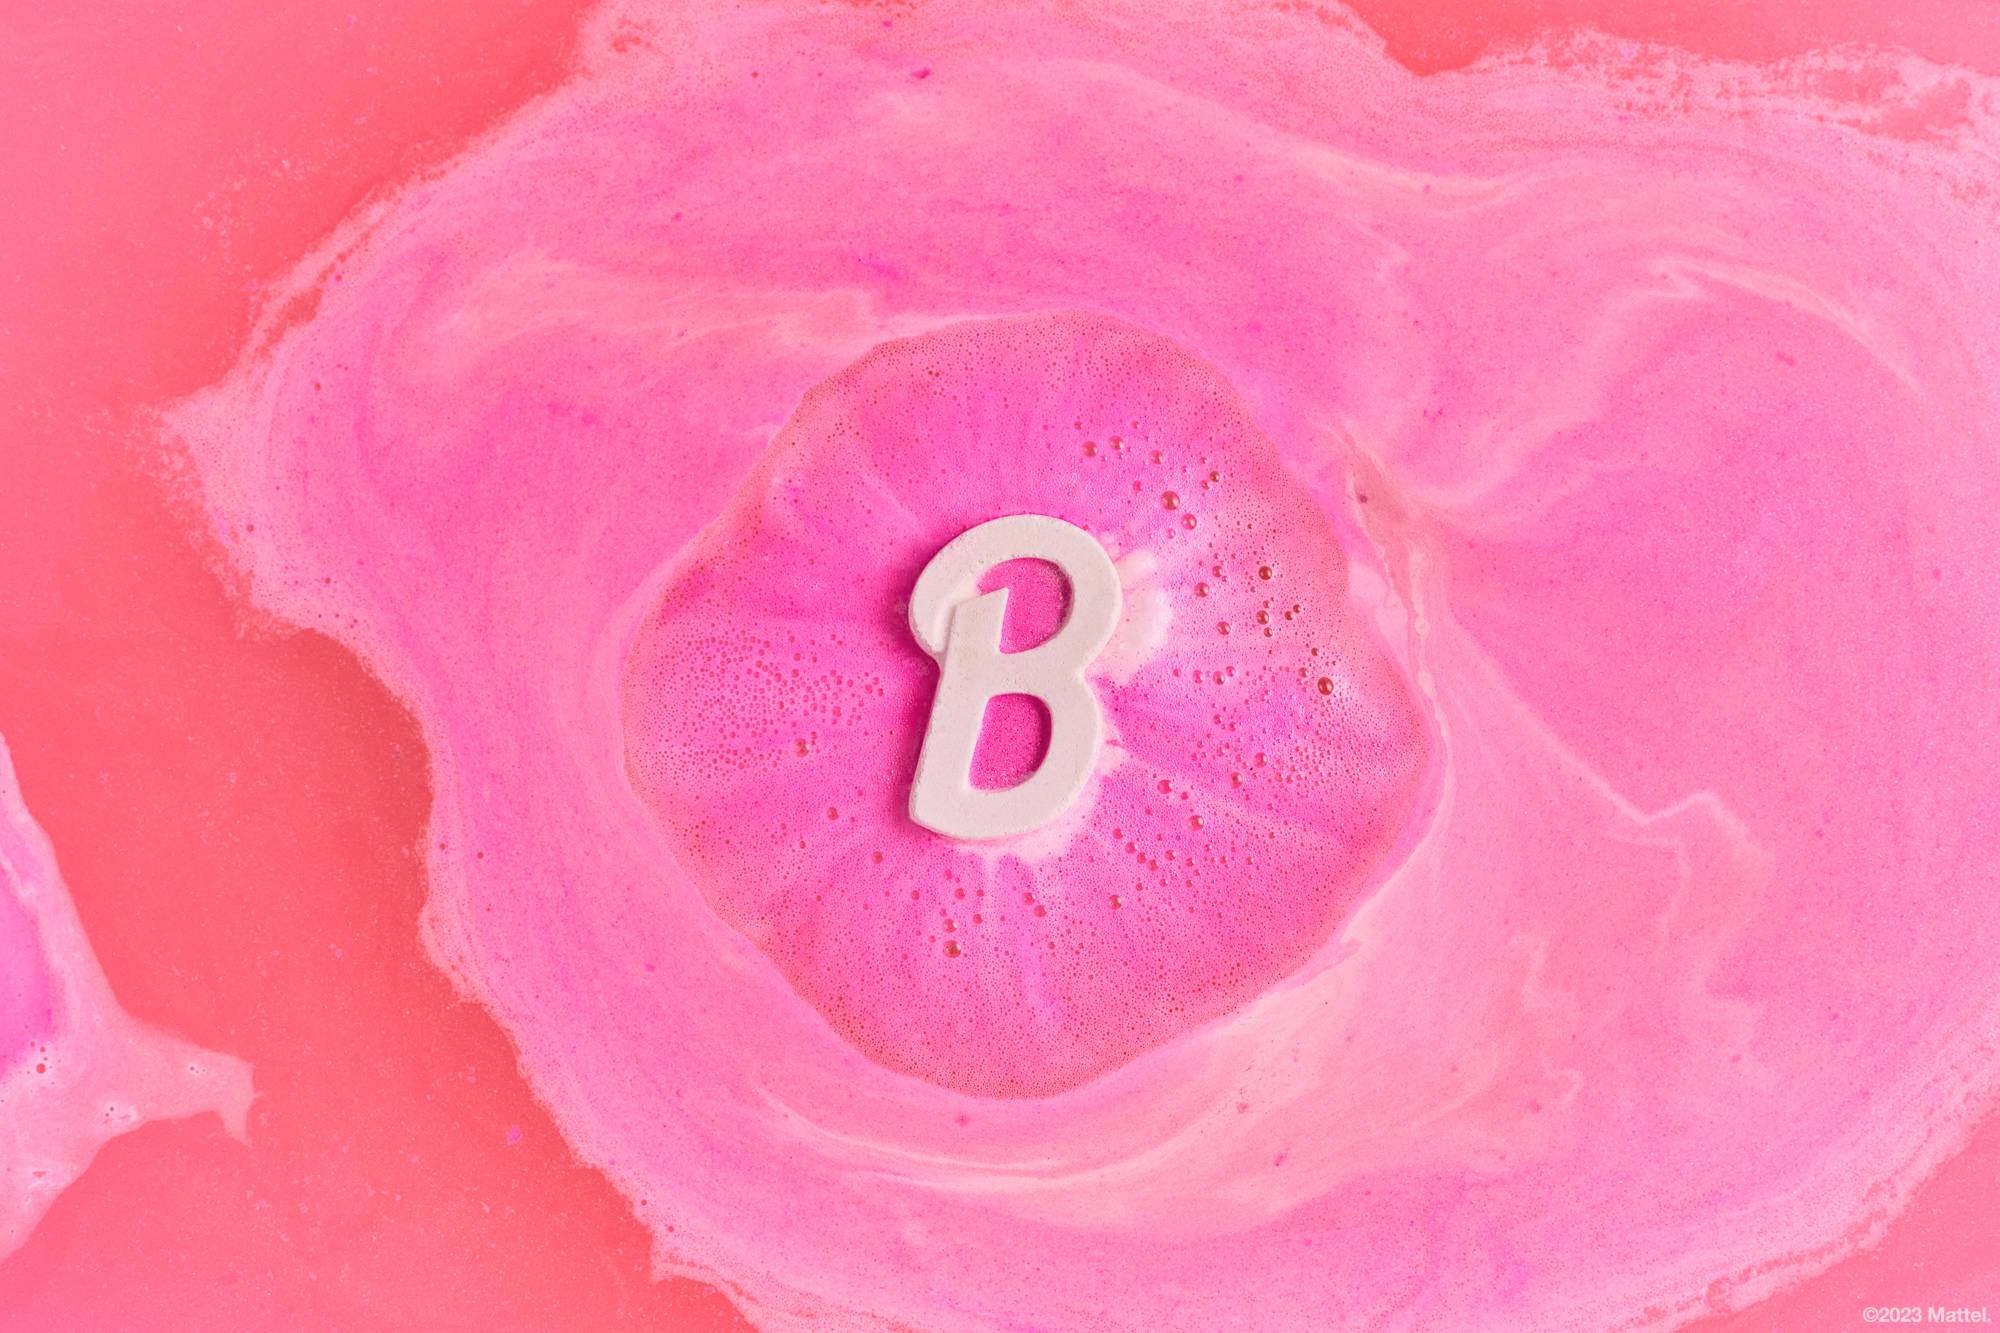 Barbie bath bomb floats gently on bathwater, slowly melting away to leave swirls of pink hues. 